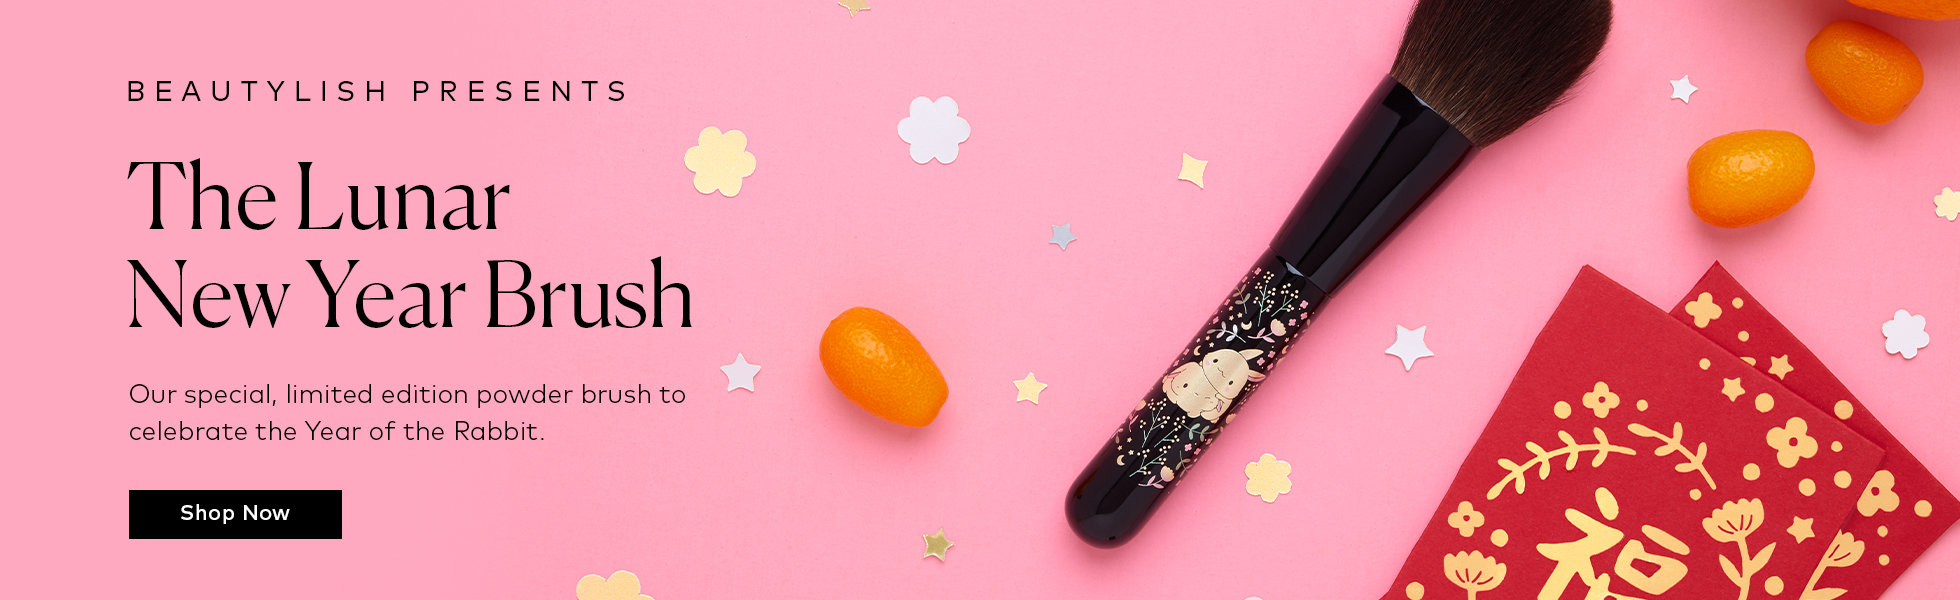 Shop the Beautylish Presents Lunar New Year Year of the Rabbit Brush here.